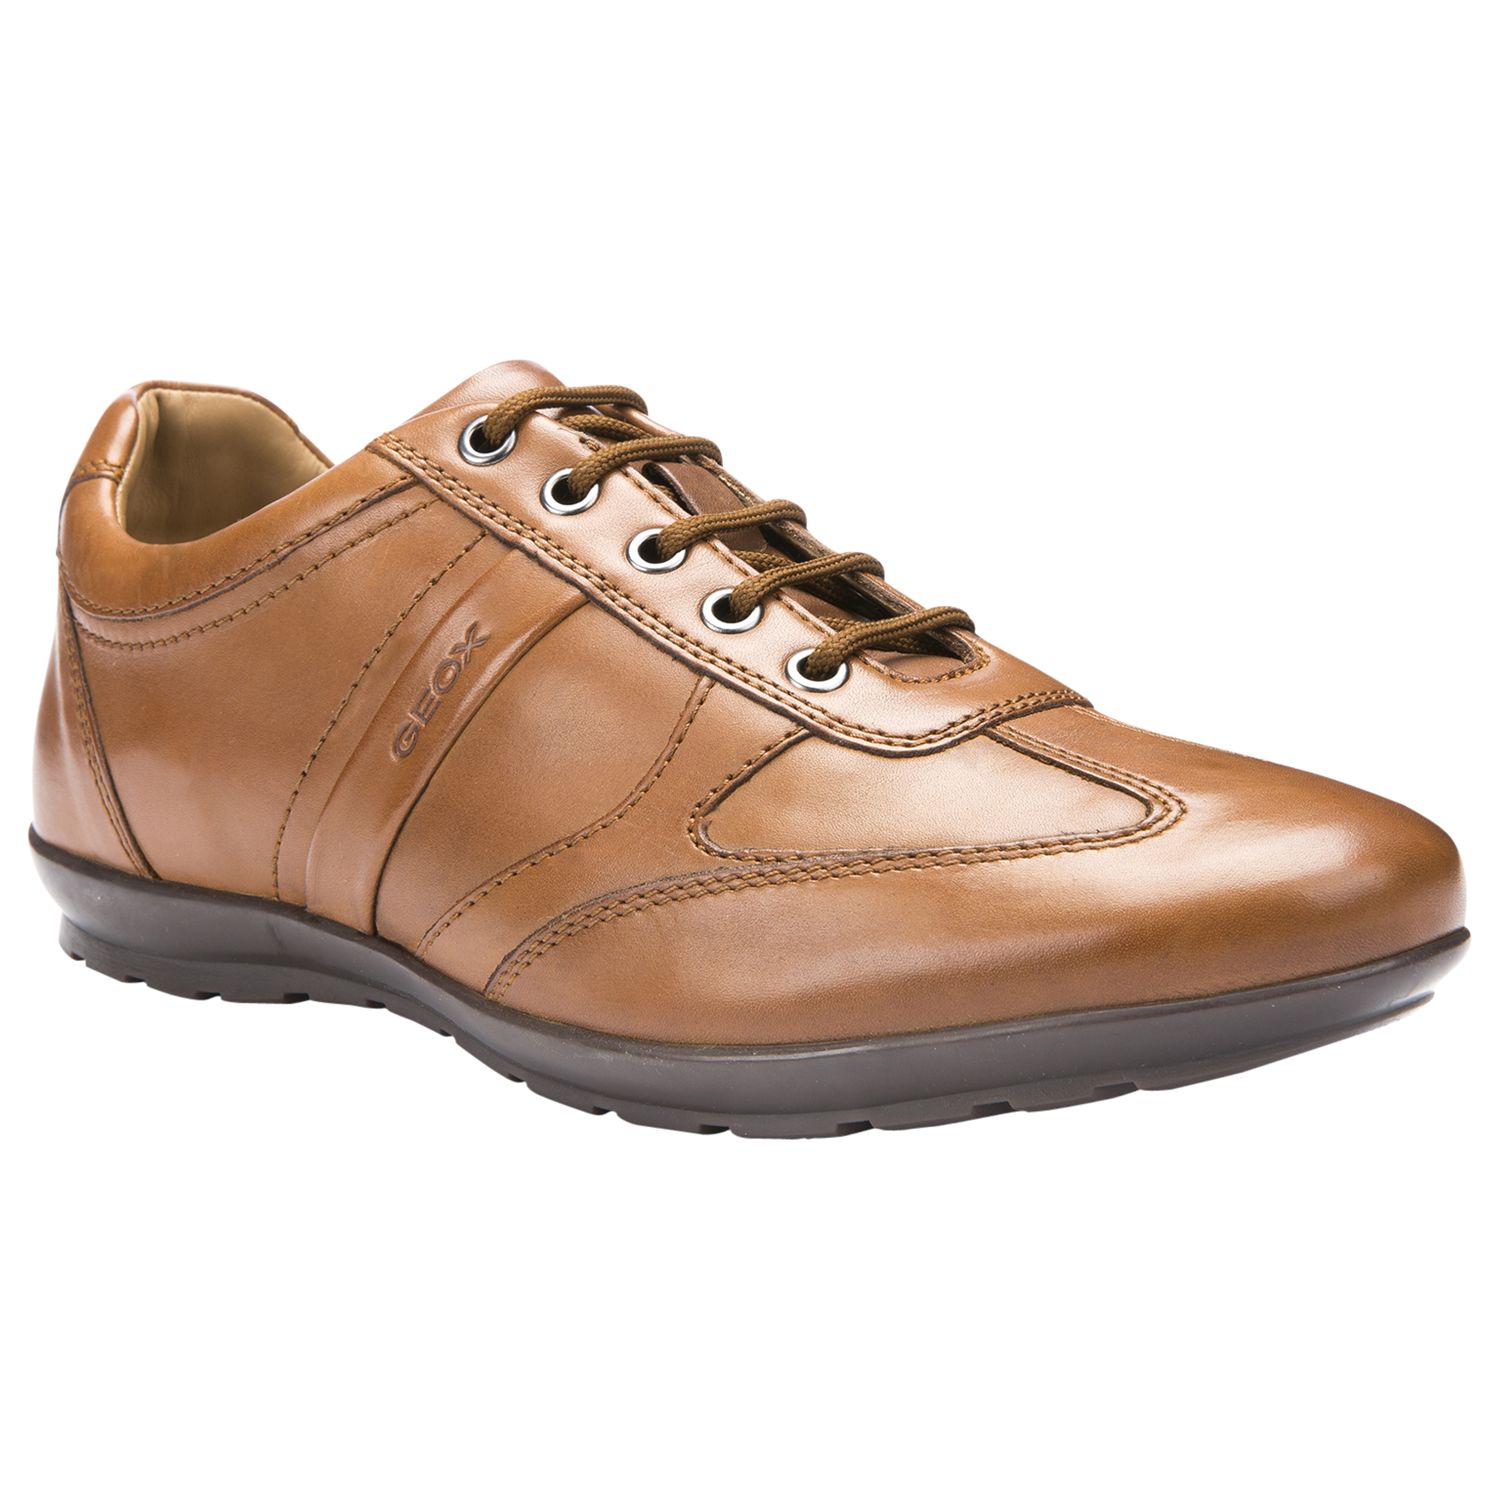 Geox Symbol City Leather Trainers, Cognac